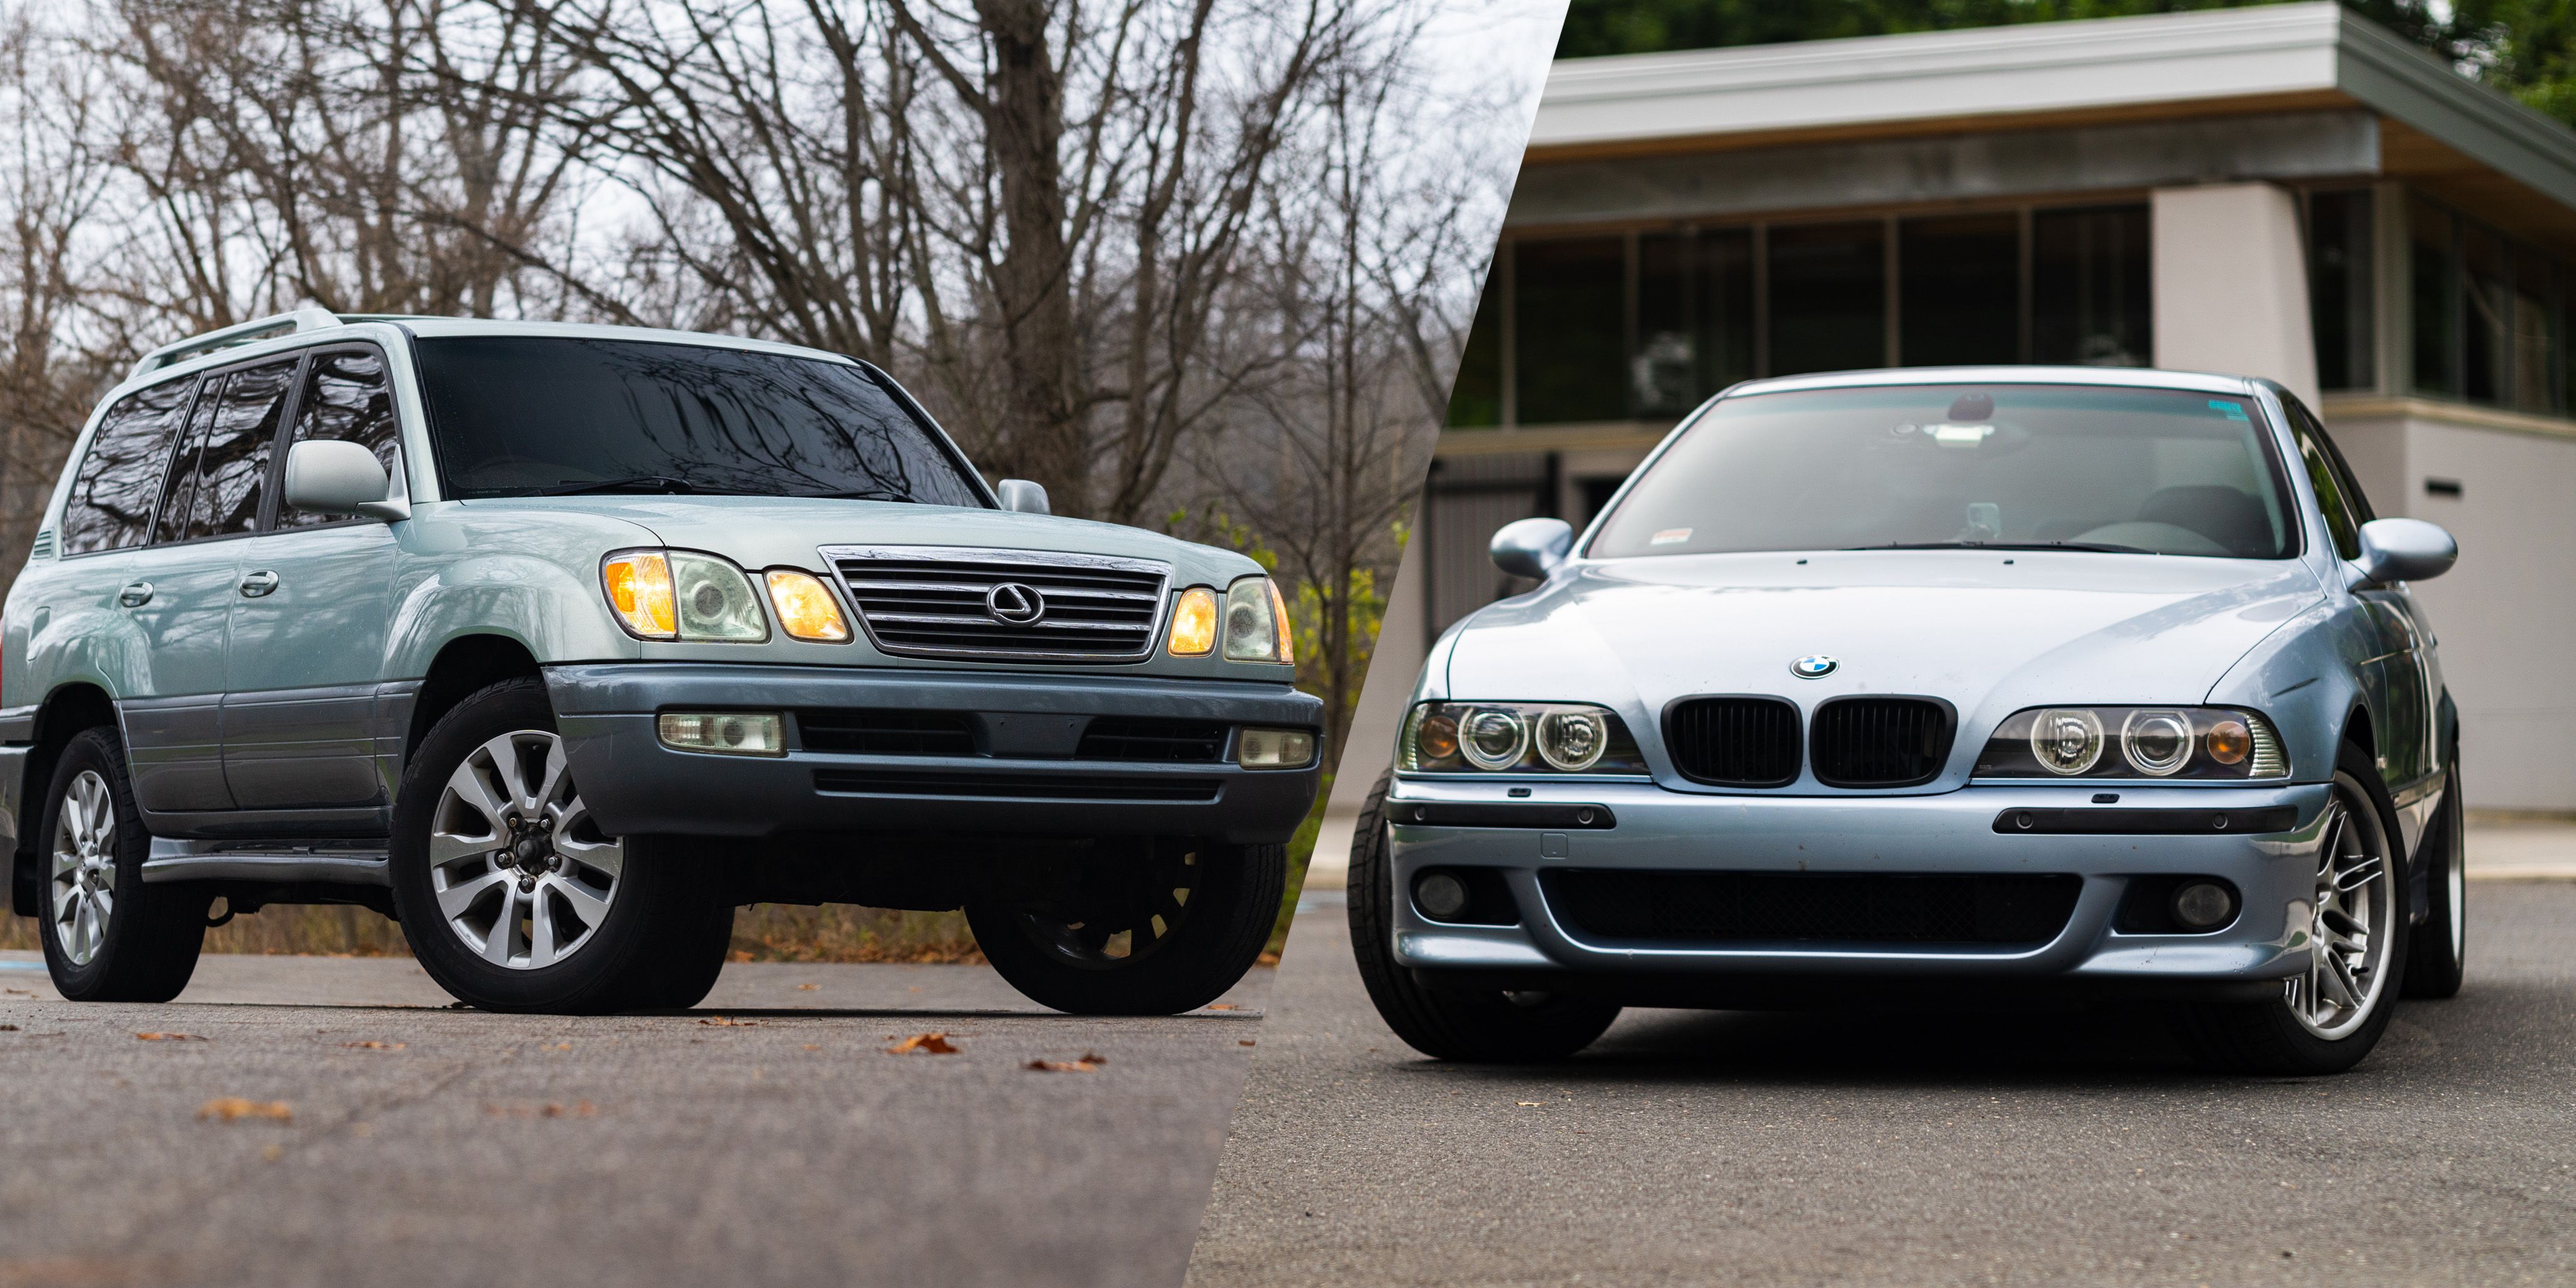 BMW E39 M5: review, history and specs